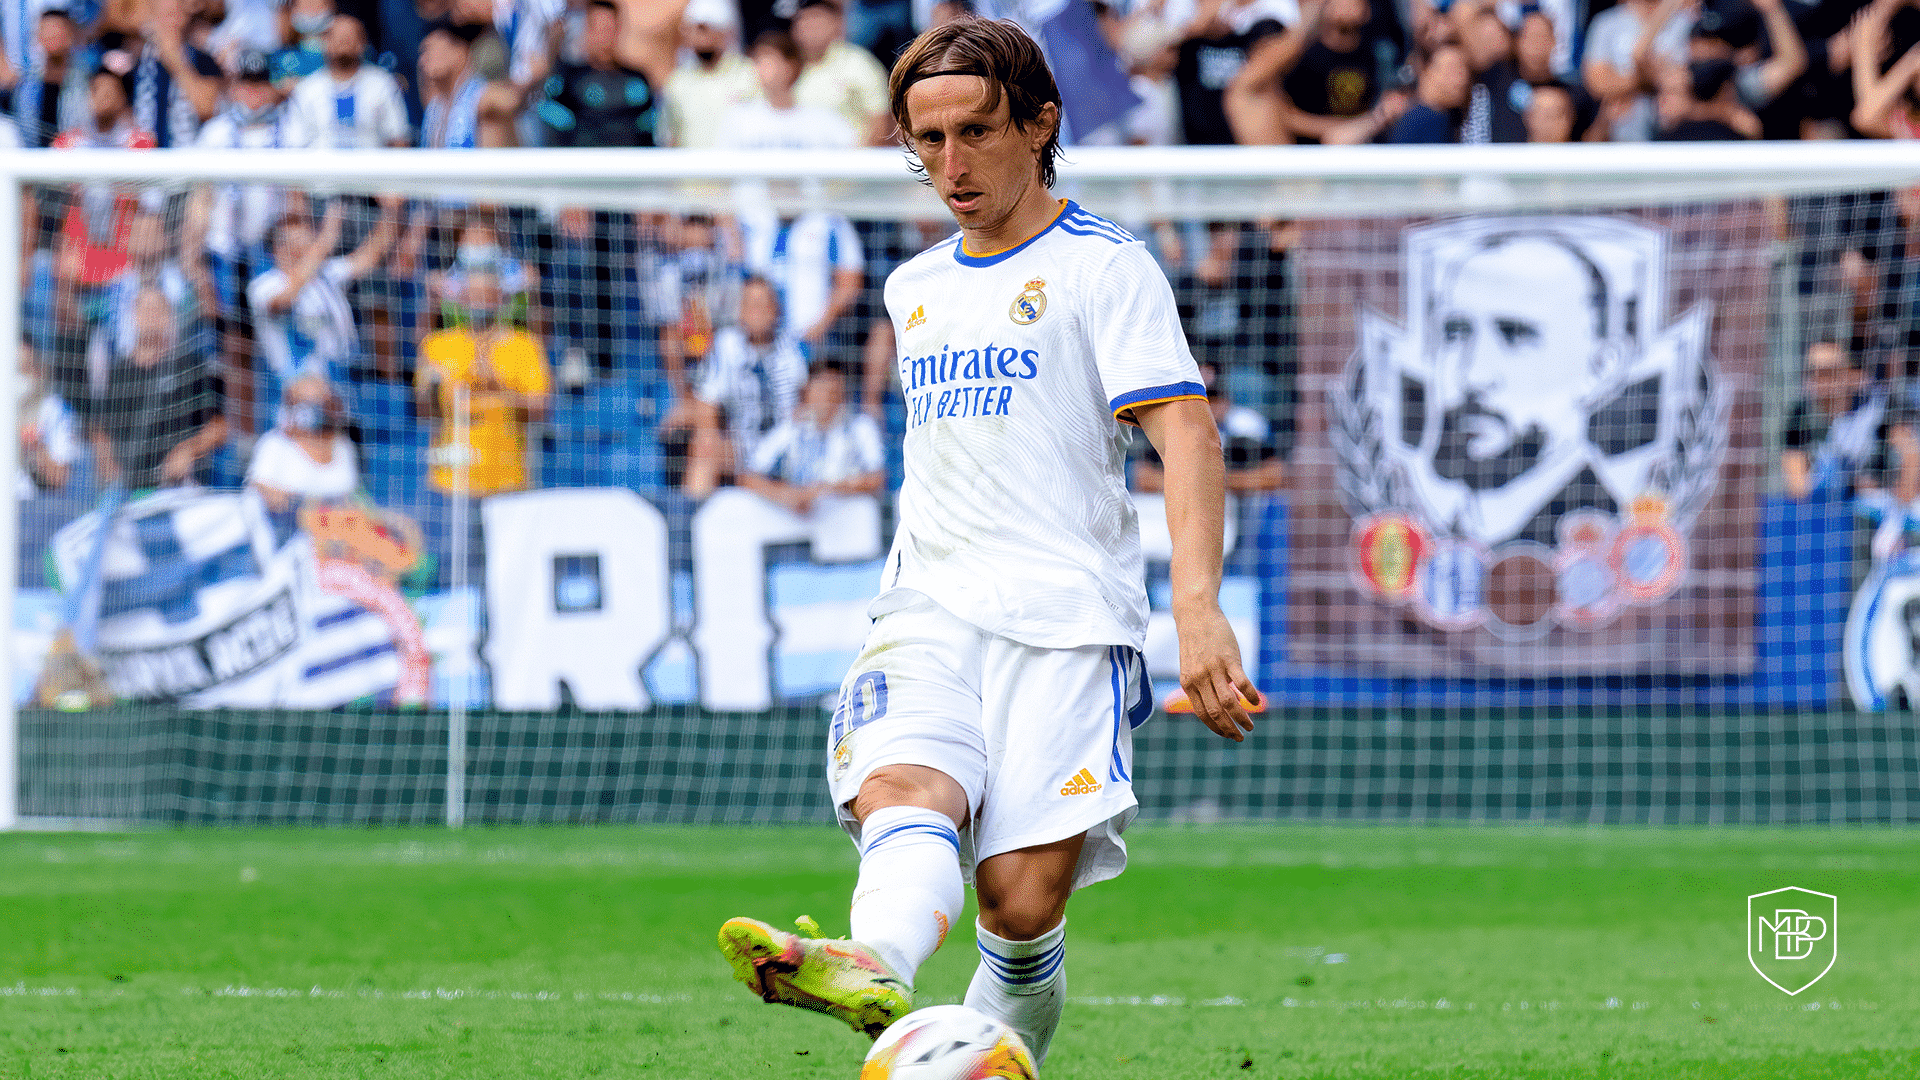 You are currently viewing LUKA MODRIC: ANALYSIS OF THE NUMBER 10 OF REAL MADRID